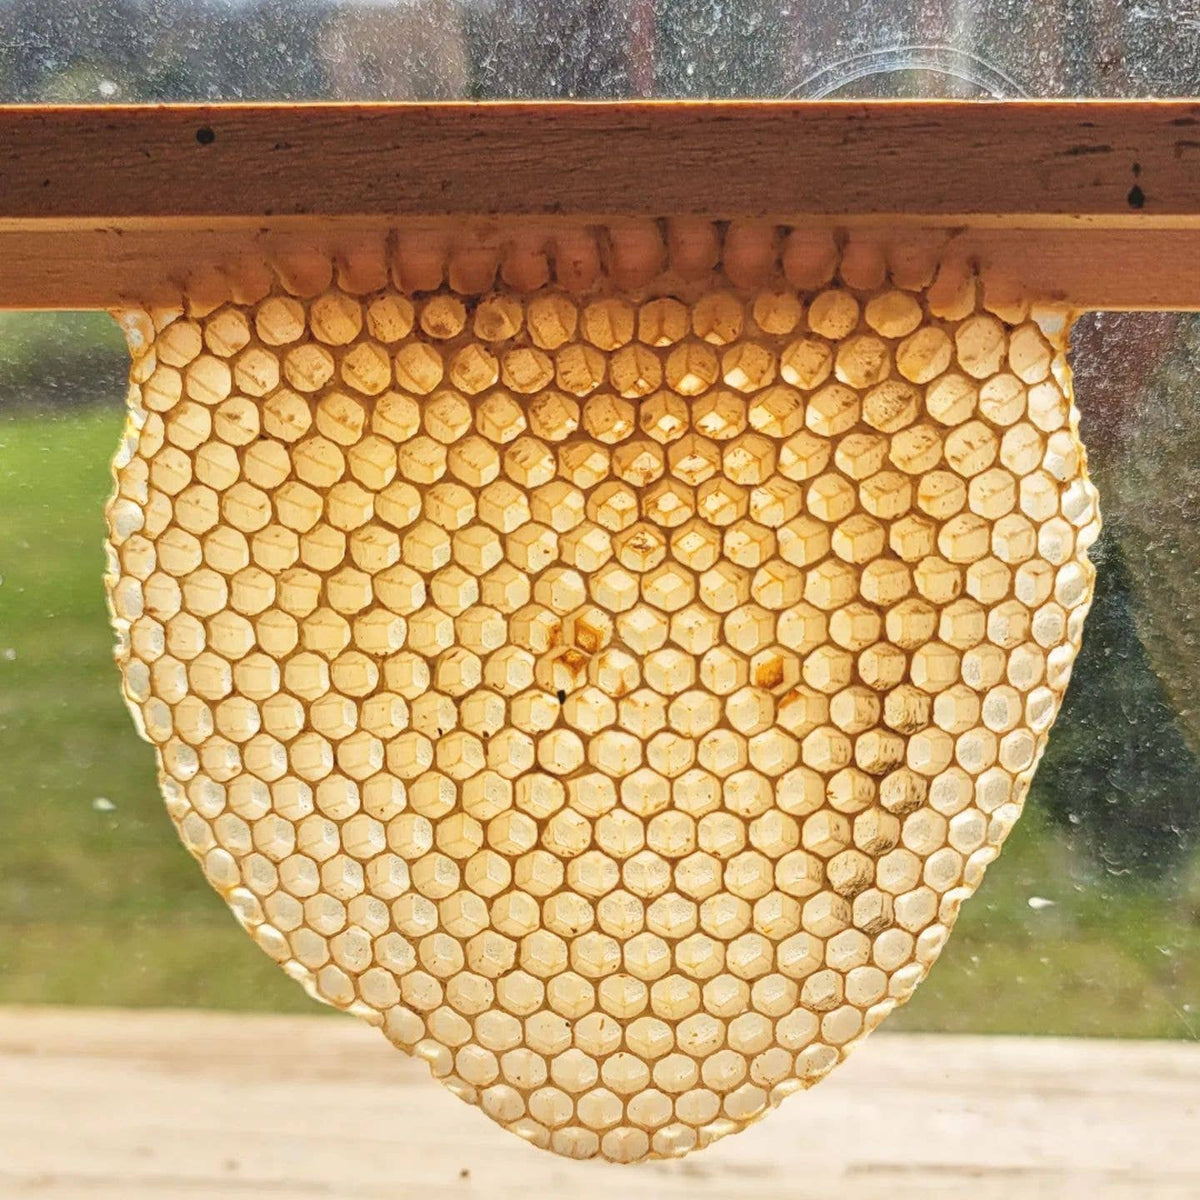 100% Beeswax Honey Pot - made out of local KC beeswax!